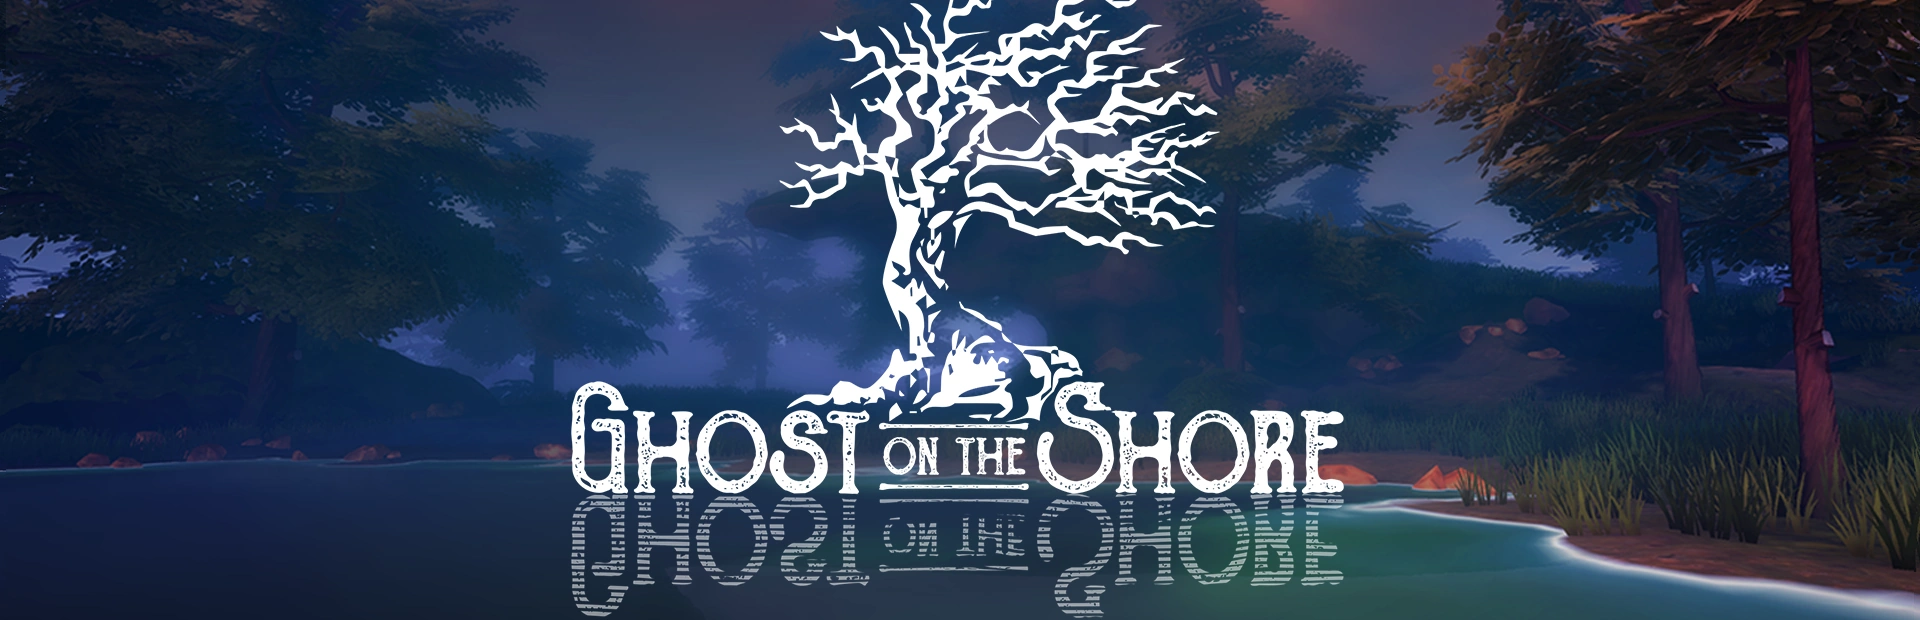 Ghost.on .the .Shore .banner1